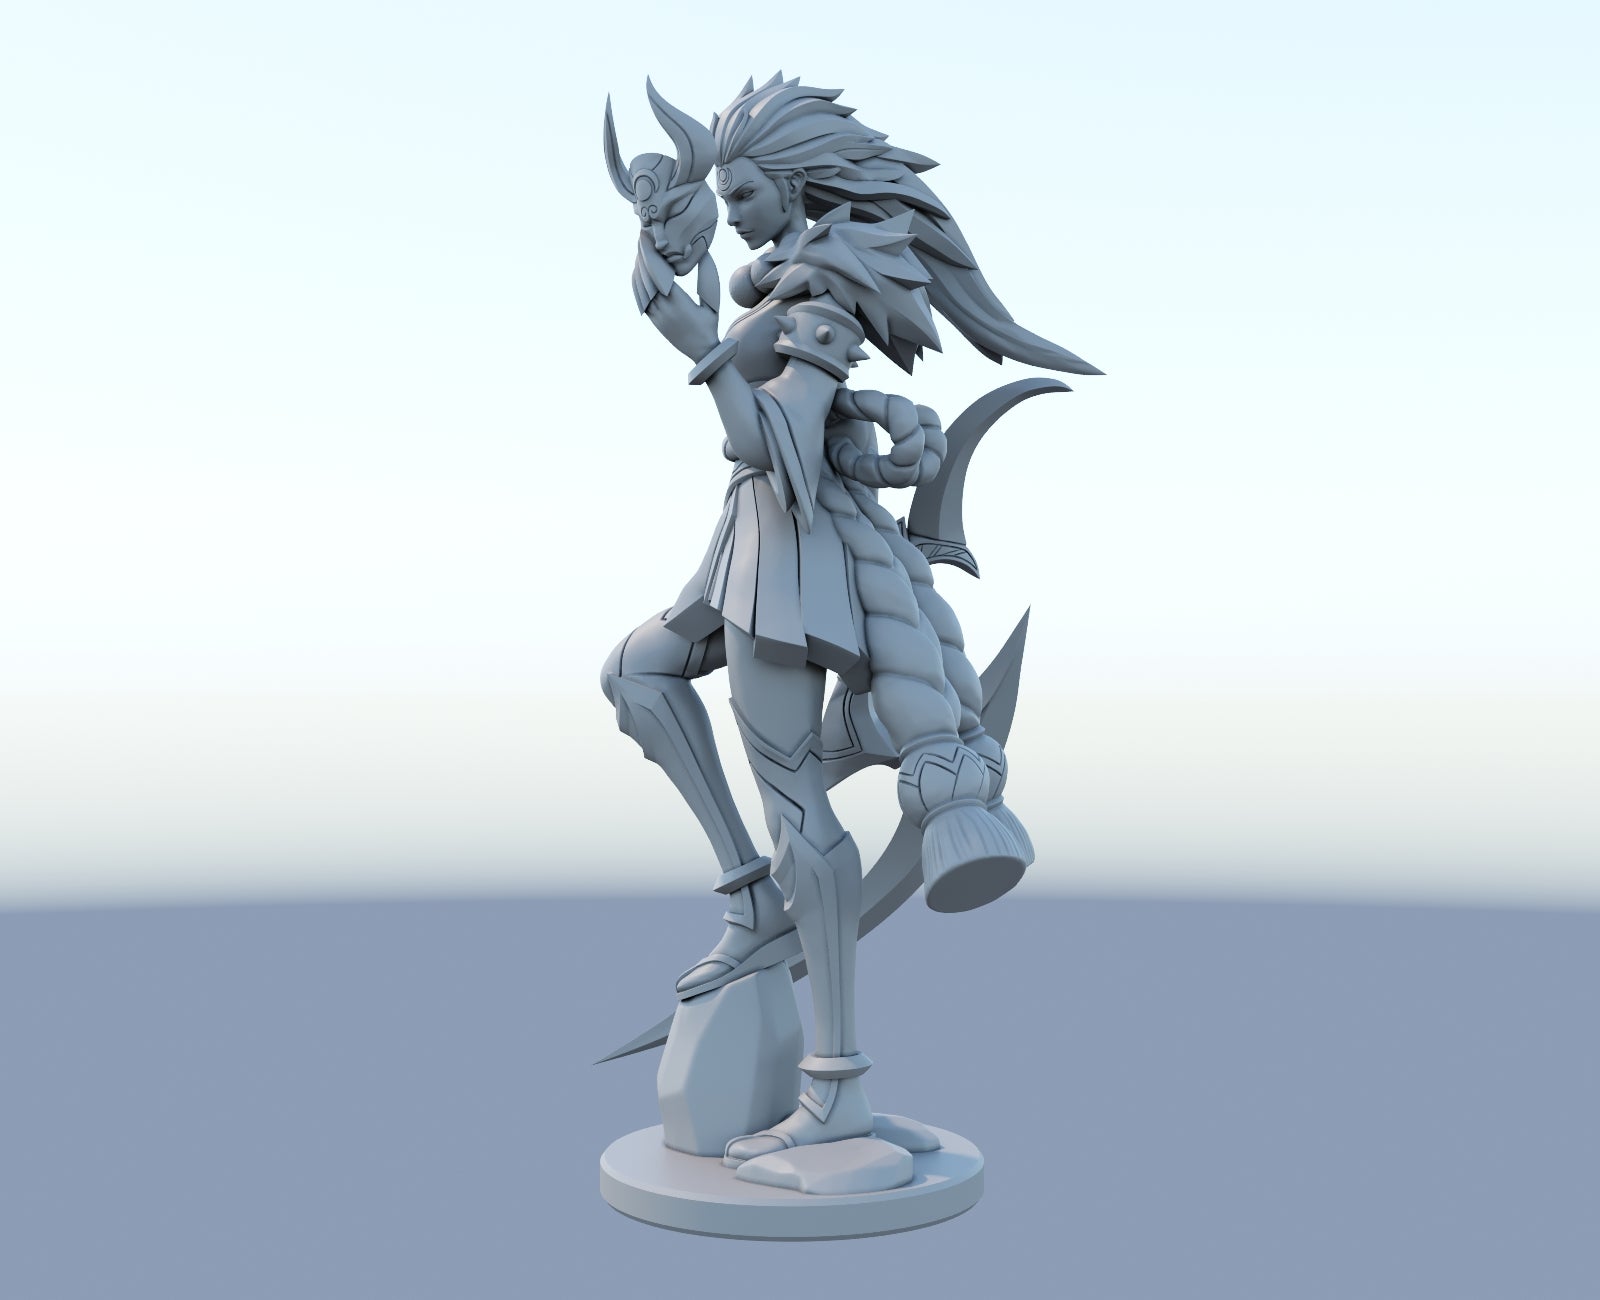 Blood Moon Diana 3D-printed League of Legends champion figure. Decorate your gaming setup or home with your favorite League of Legends champion! Choose between the unpainted version, perfect for you to paint yourself, or the hand-painted version by a professional painter. Order your figure today!